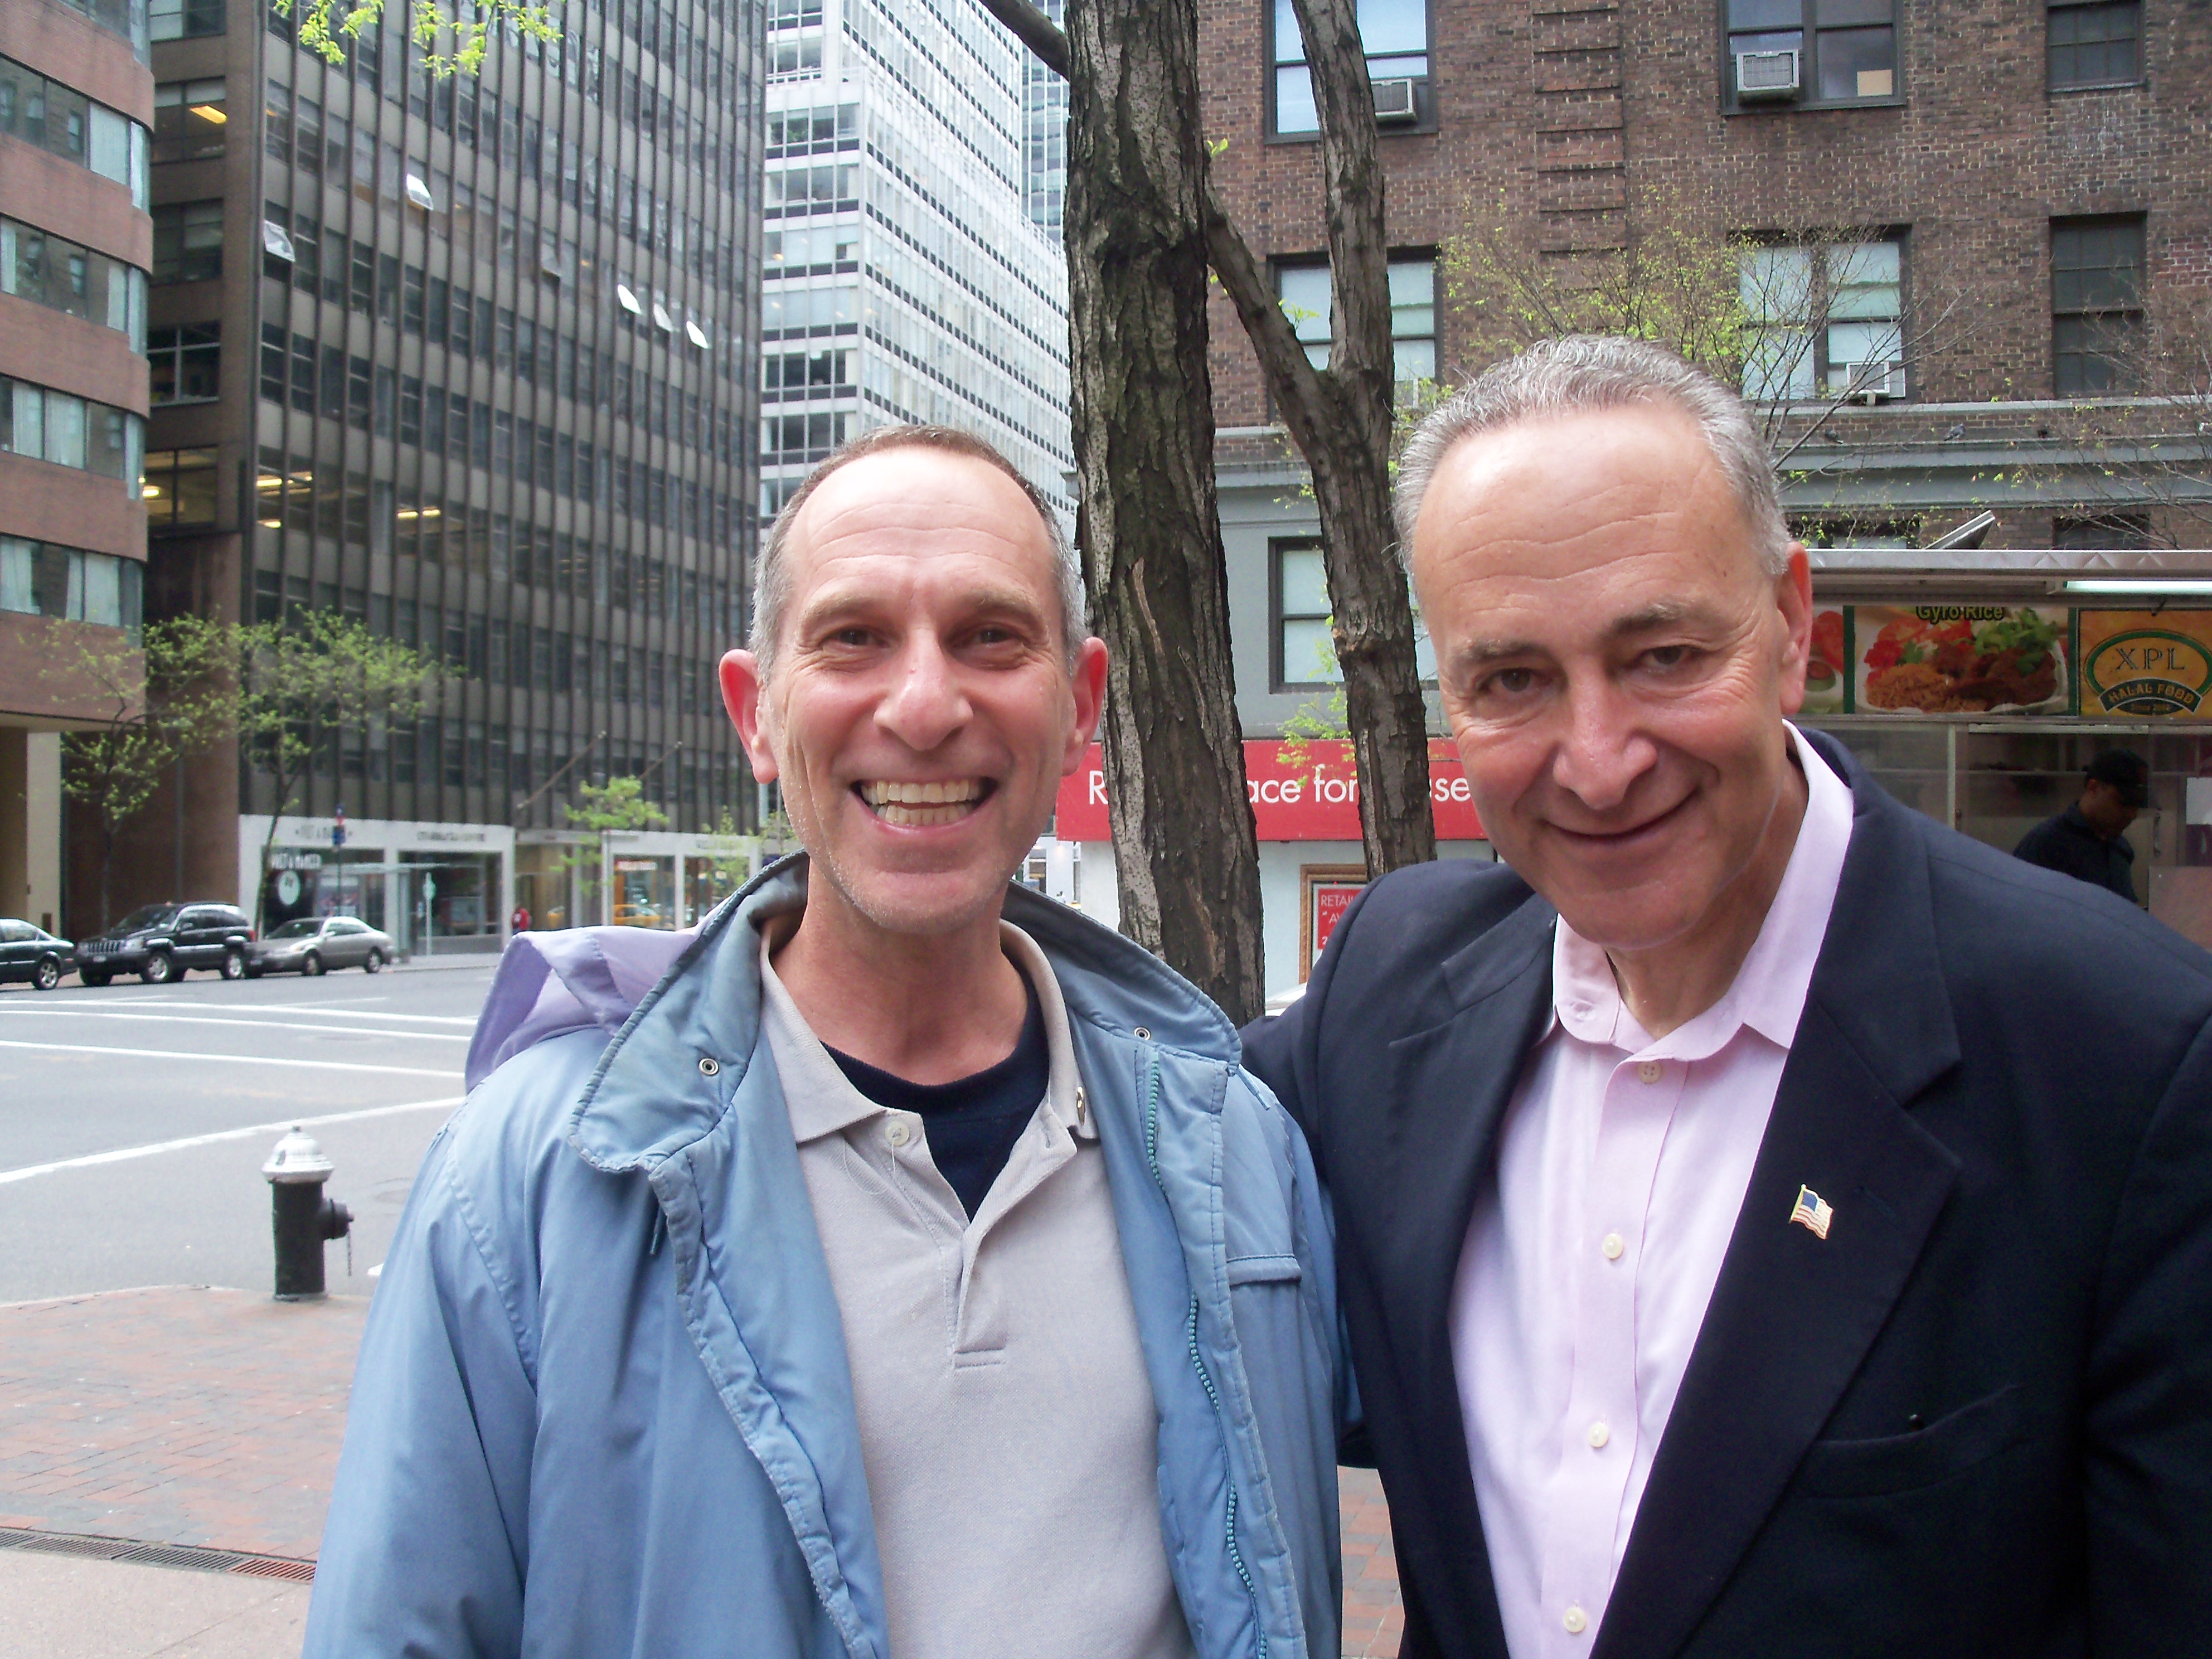 Phil and United States Senator Charles Schumer in New York City, April 15, 2012